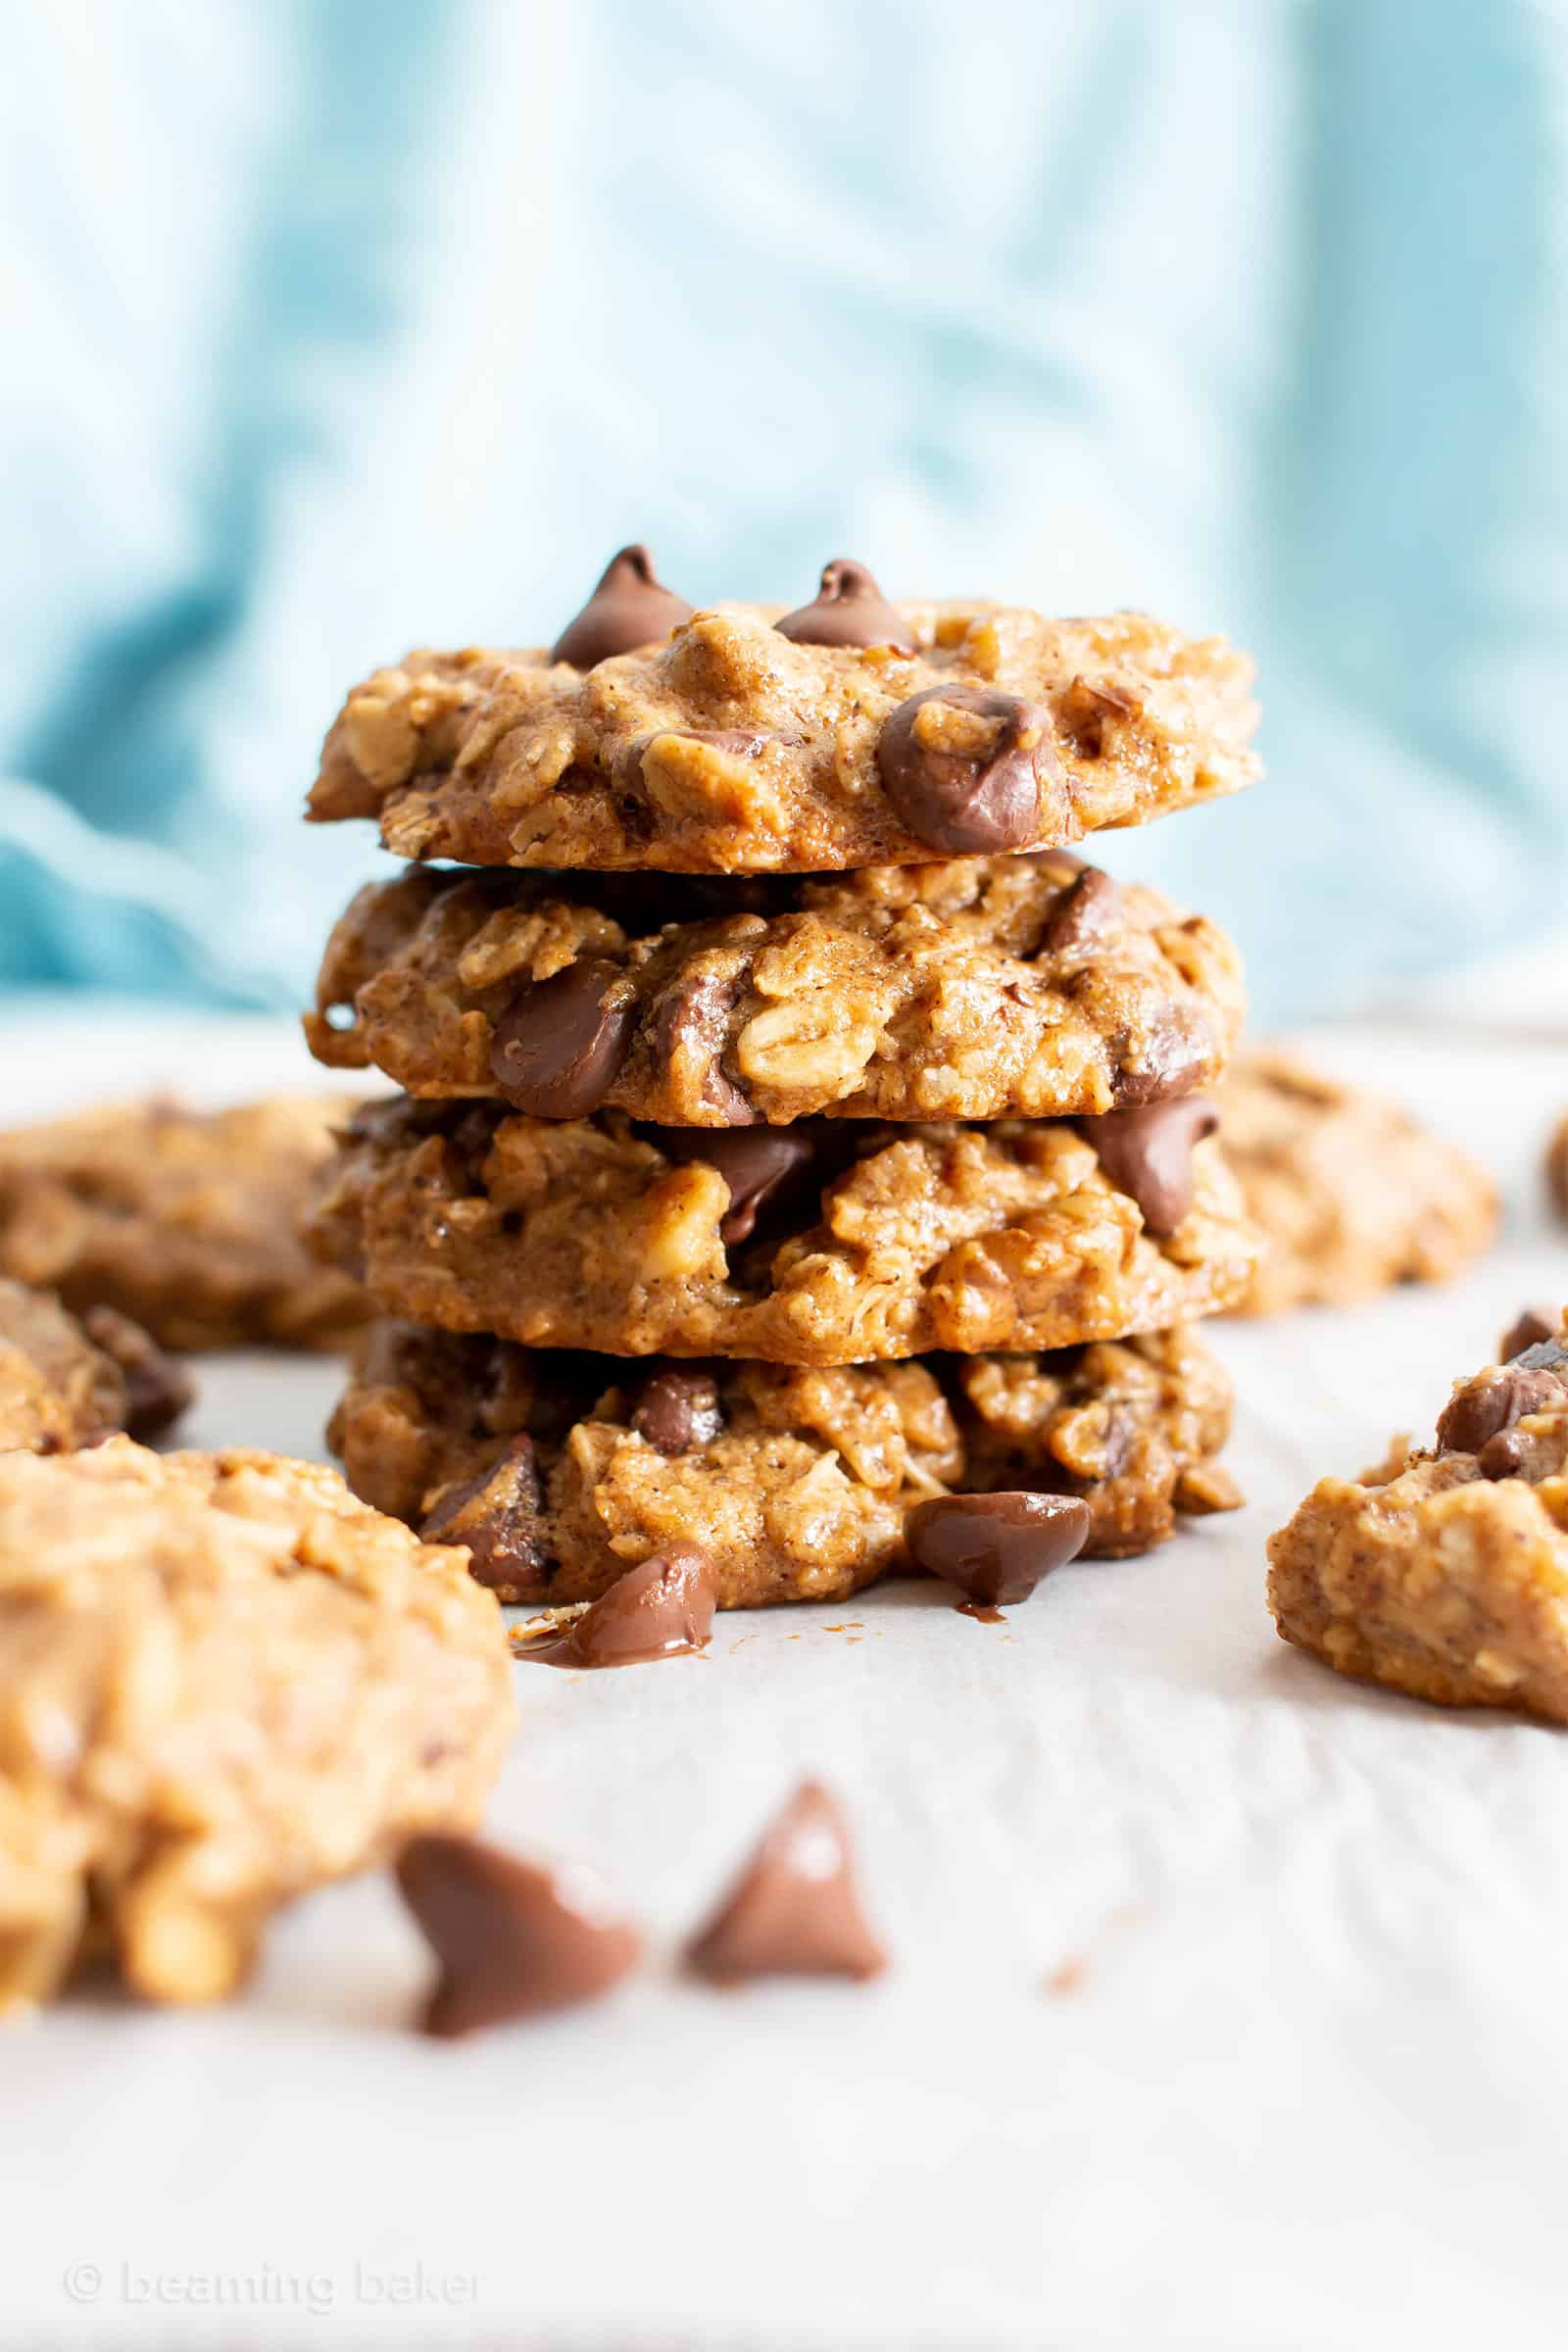 Choc Chip Oatmeal Cookies Healthy
 Chewy Healthy Oatmeal Chocolate Chip Cookies Vegan